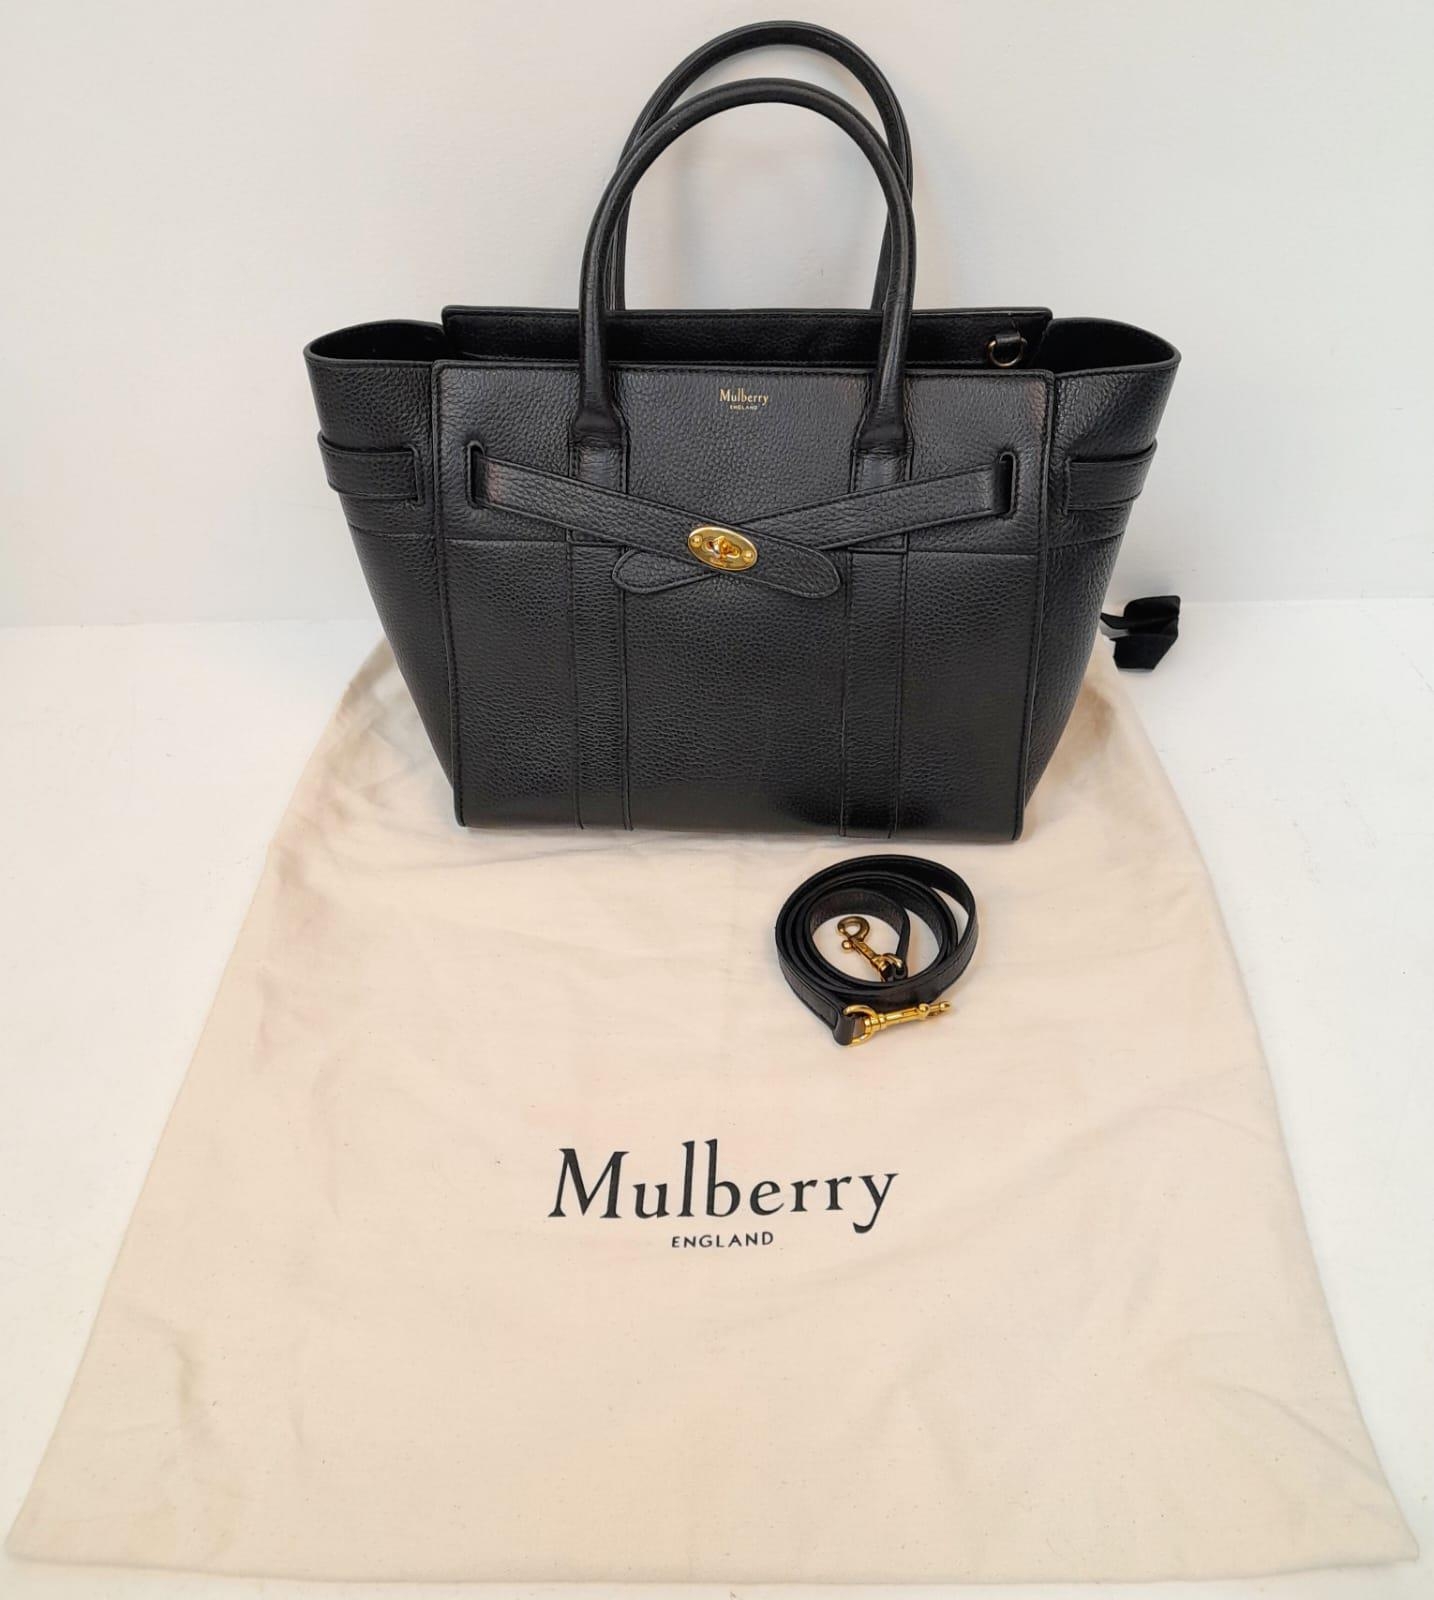 A Mulberry Bayswater Leather Handbag. Textured black leather exterior with gold tone hardware. - Image 9 of 9